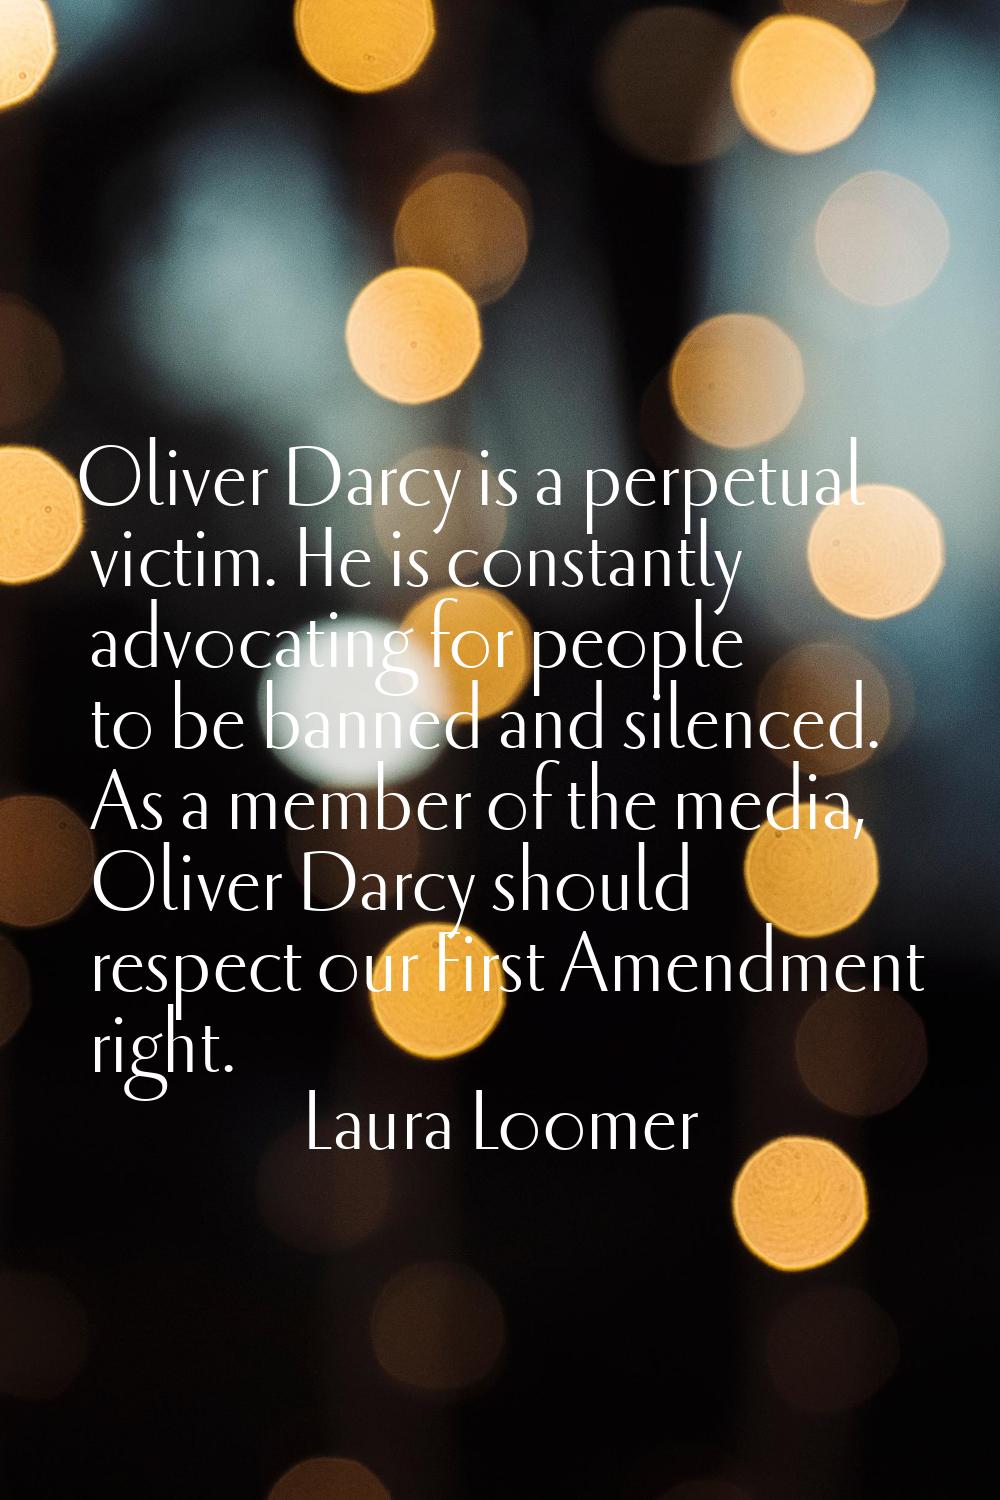 Oliver Darcy is a perpetual victim. He is constantly advocating for people to be banned and silence